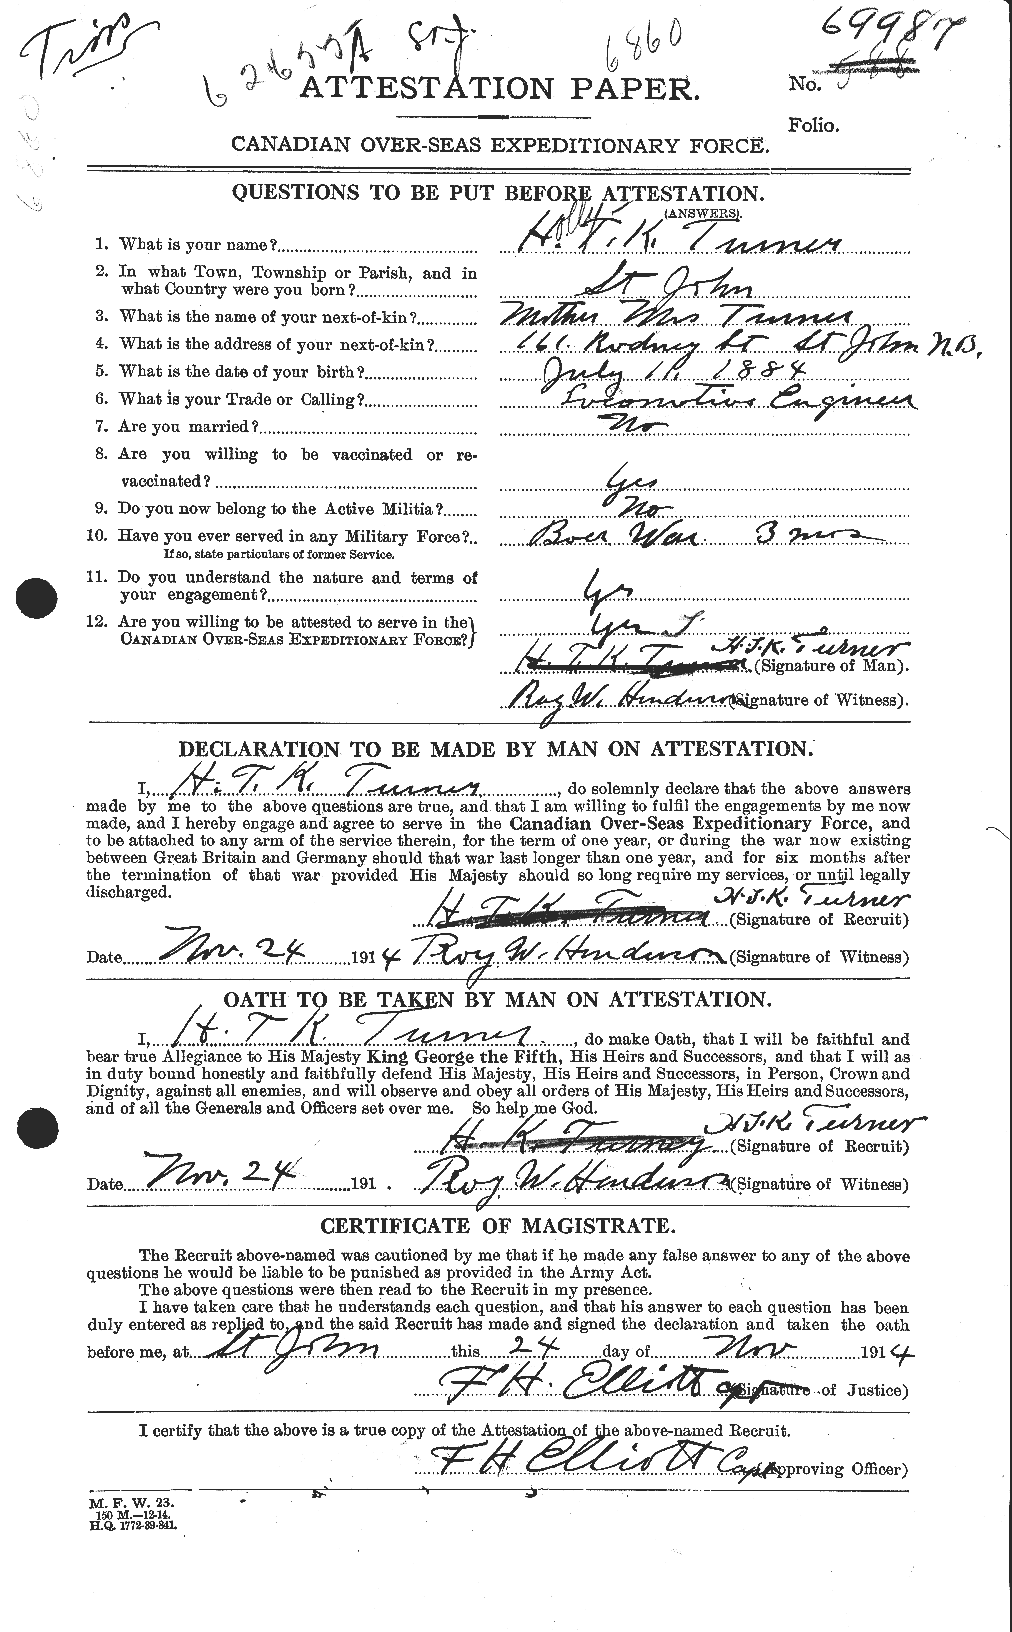 Personnel Records of the First World War - CEF 648634a